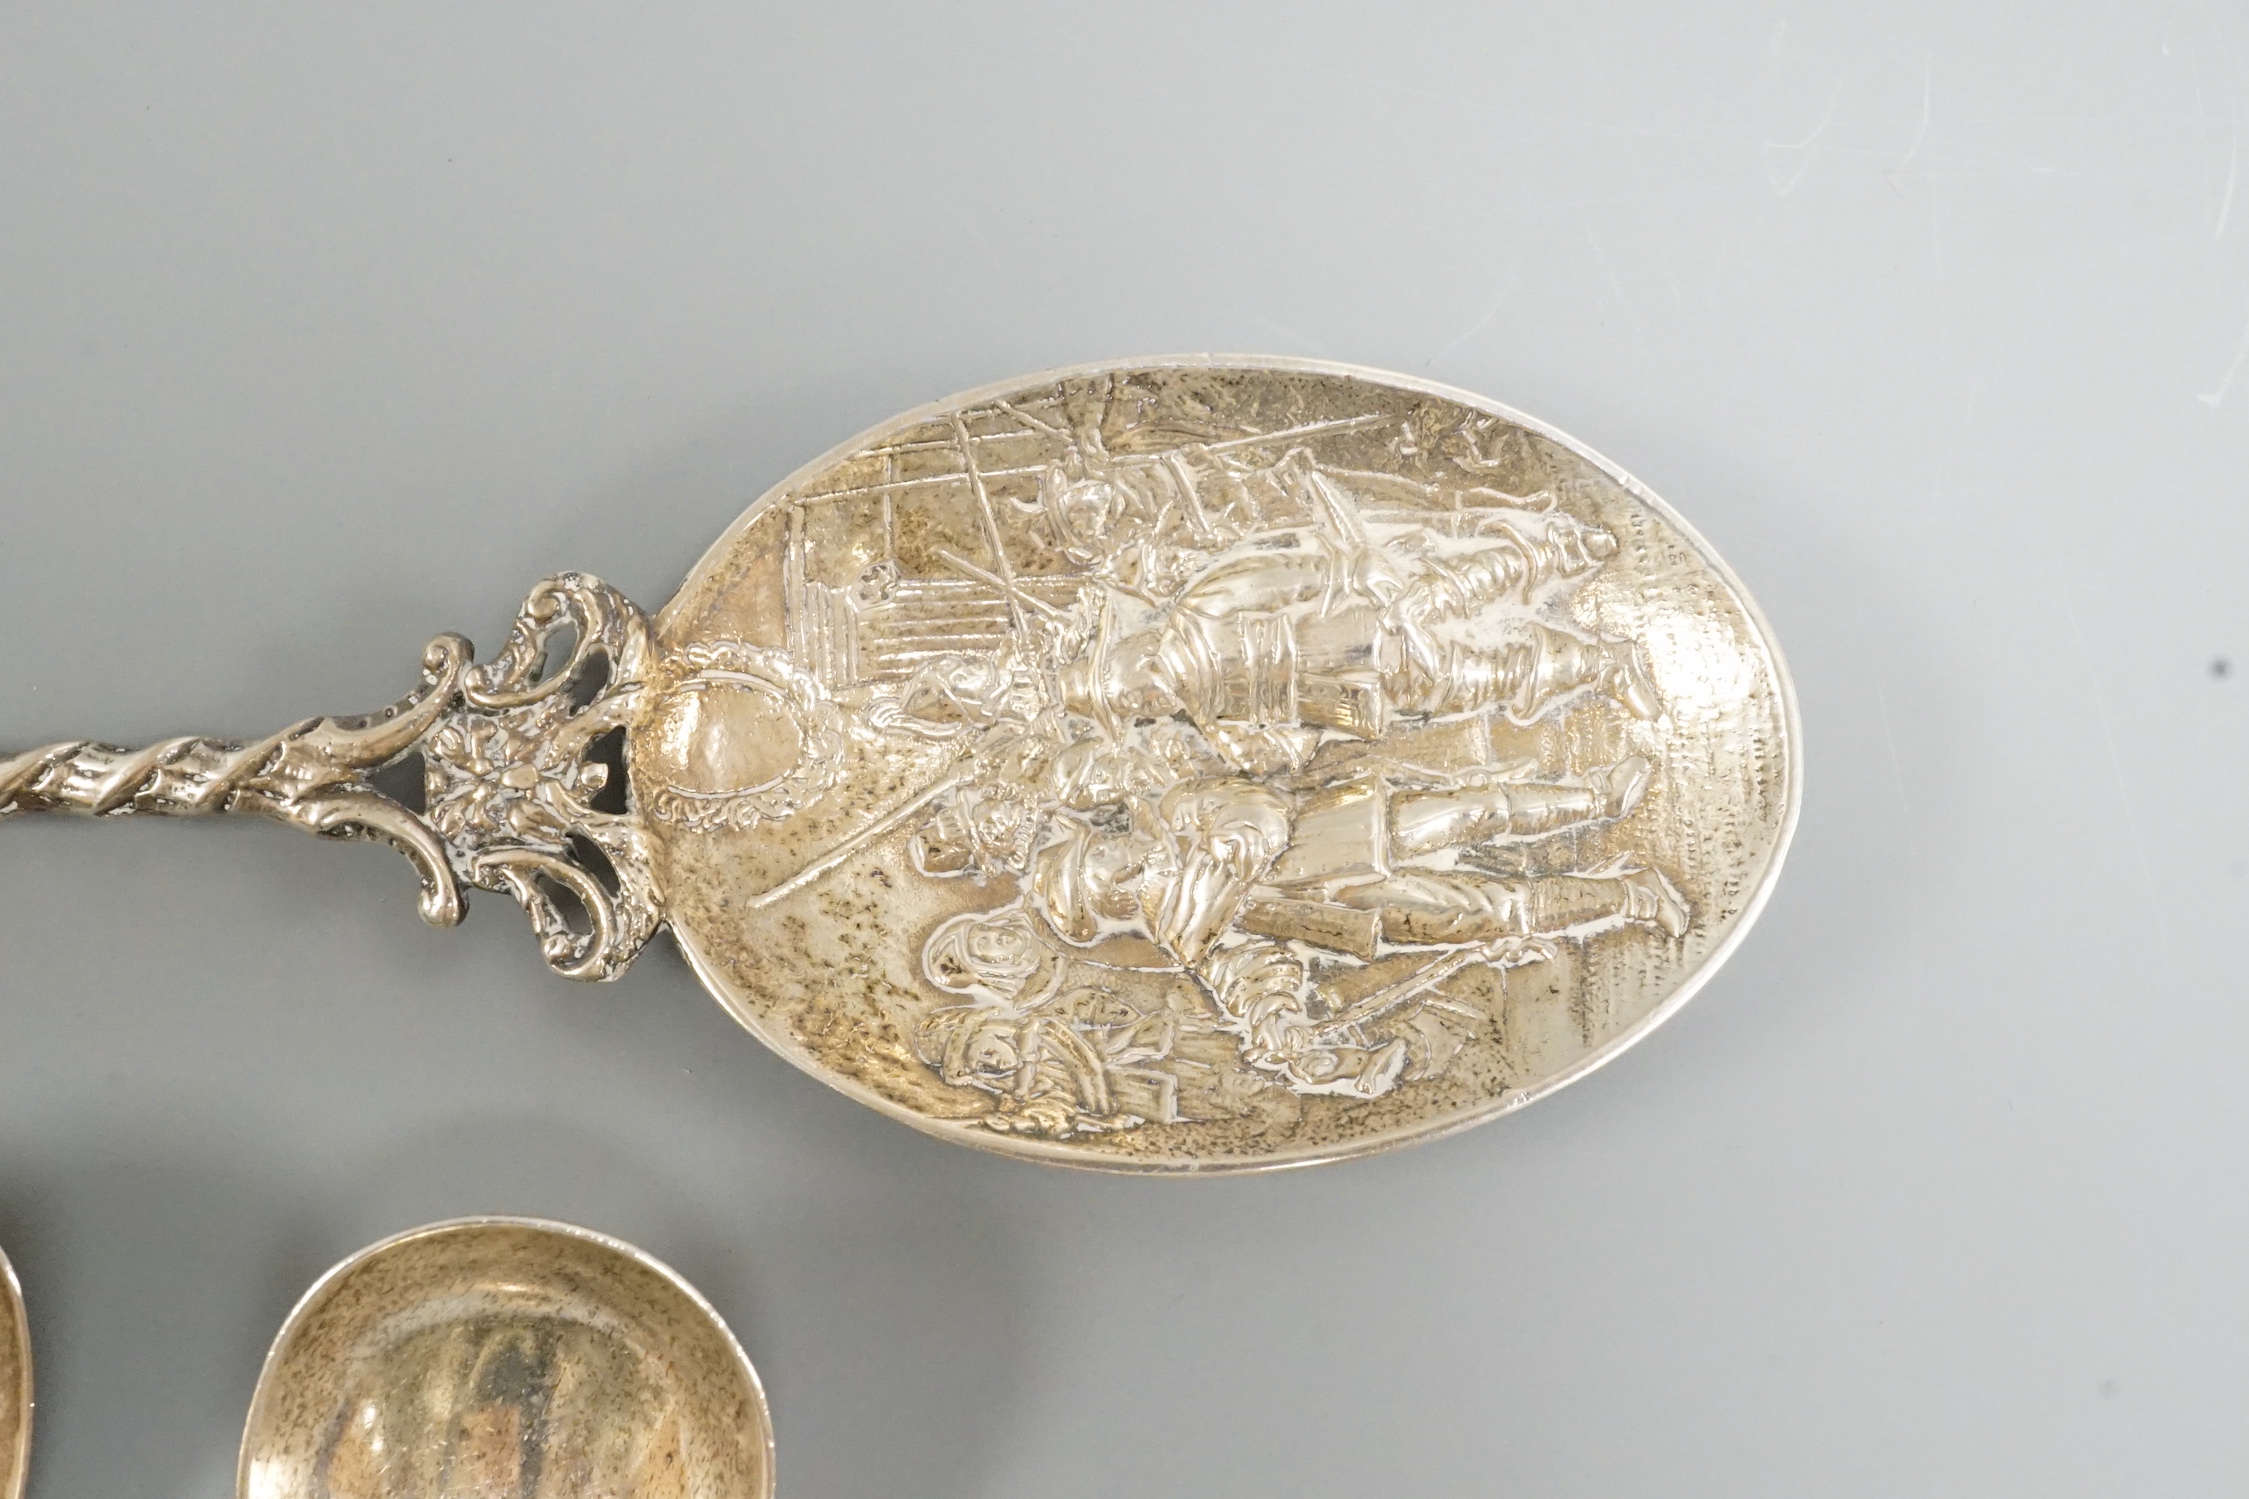 Two 19th century silver caddy spoons, including Birmingham, 1827, one later caddy spoon and an ornate Dutch white metal serving spoon.